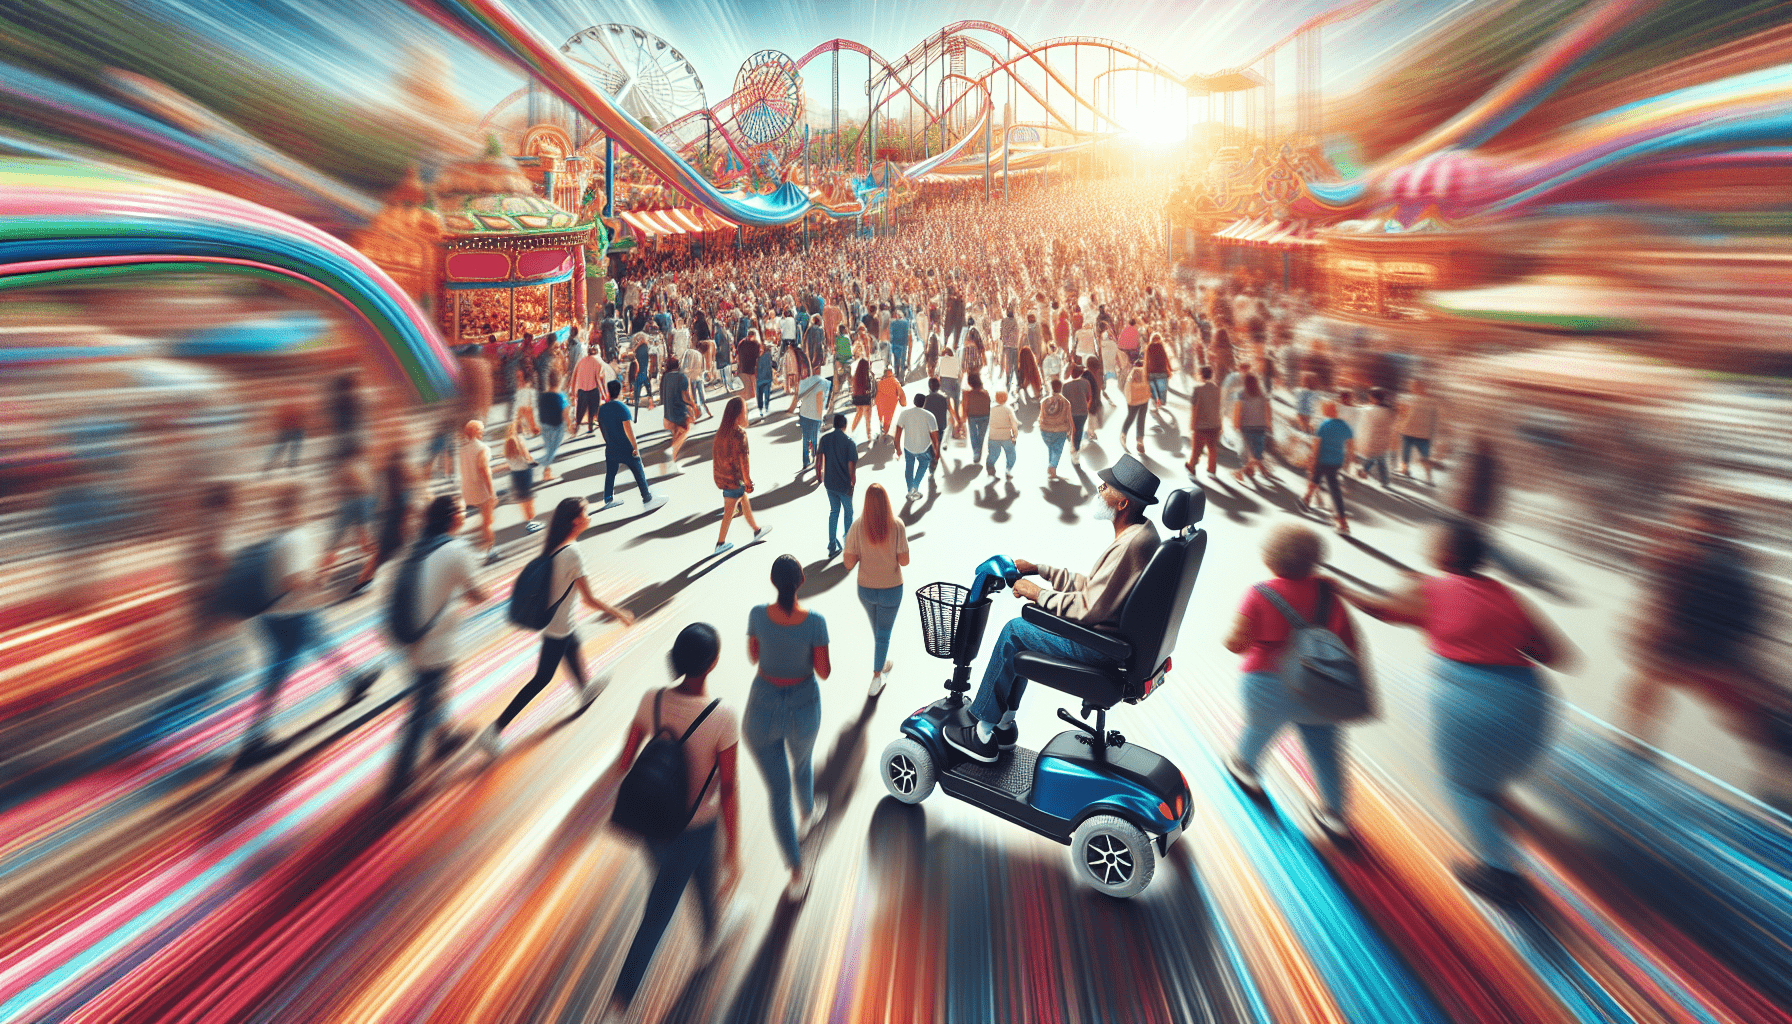 Can I Use My Mobility Scooter In A Crowded Amusement Park?